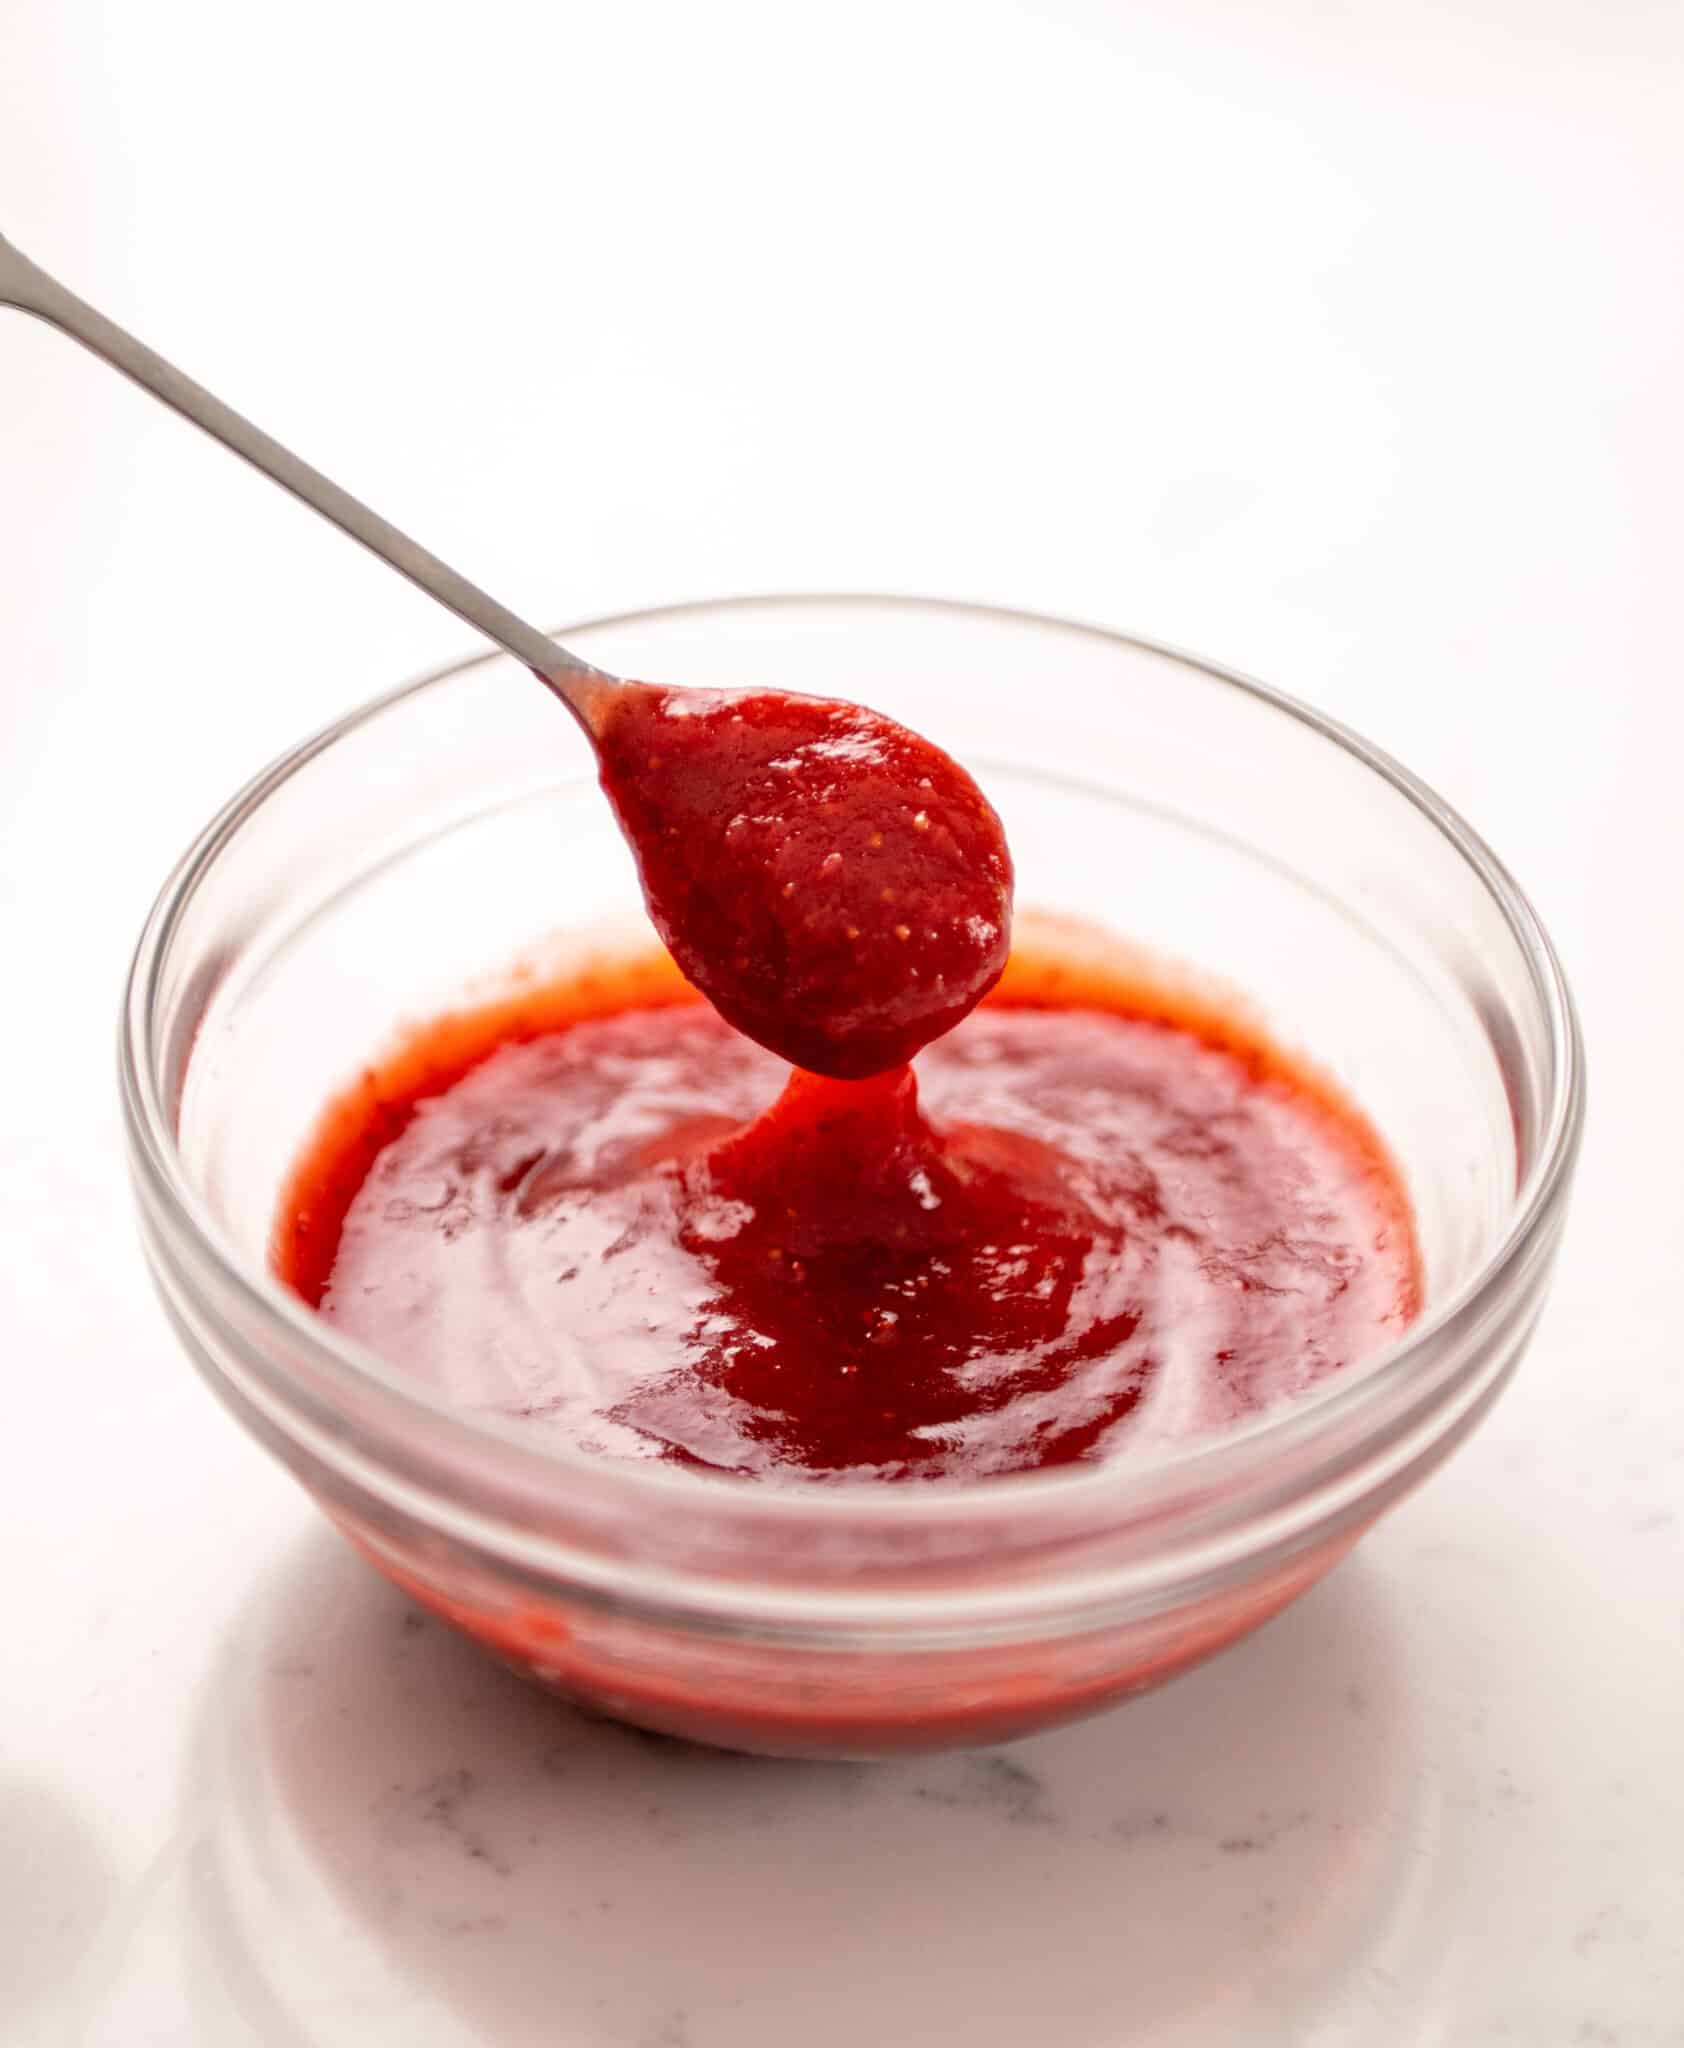 spoonful of strawberry puree